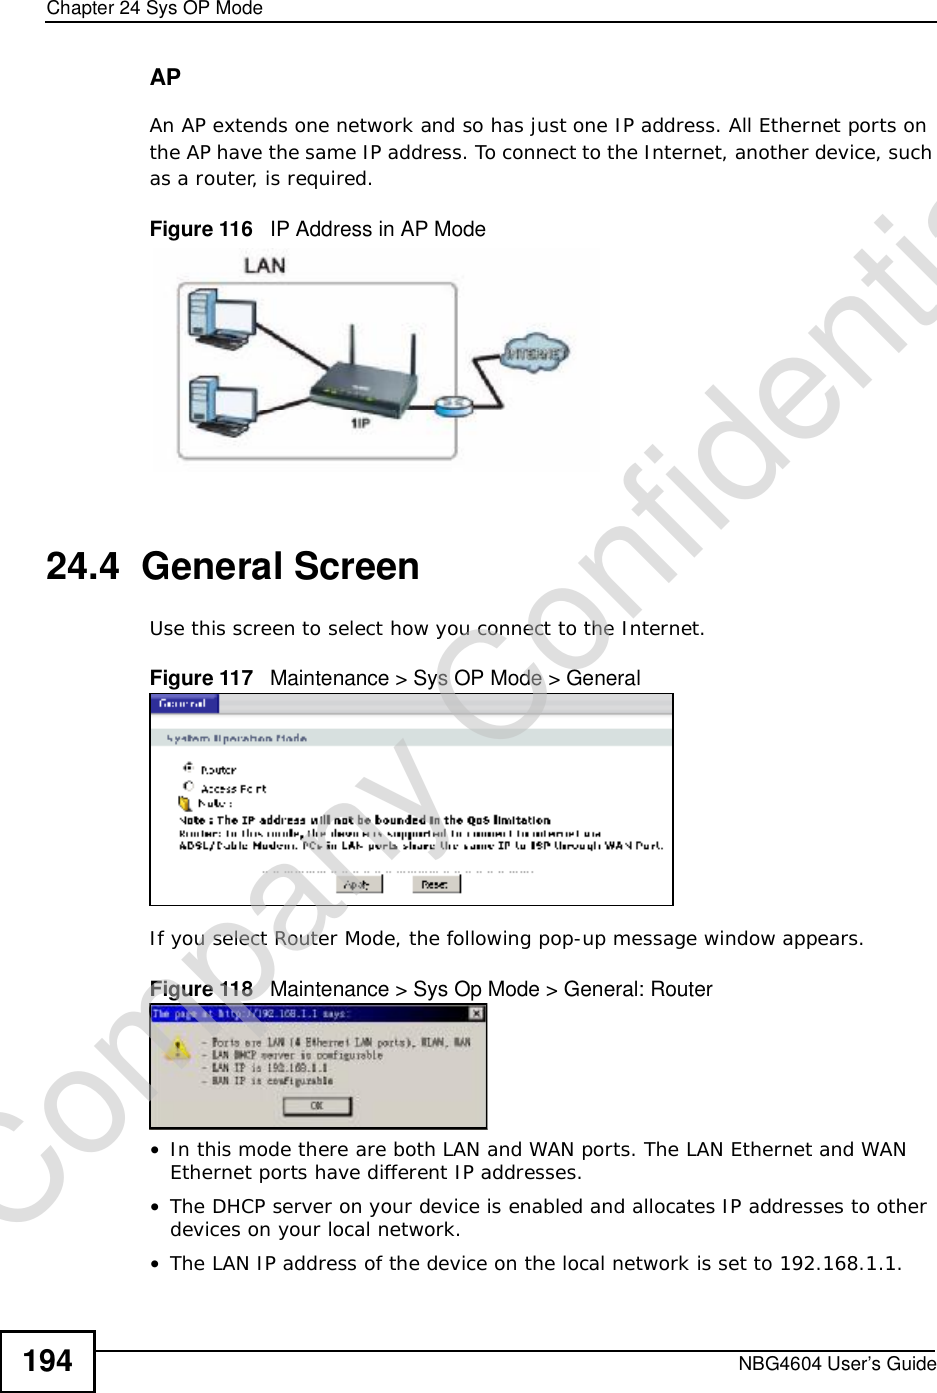 Chapter 24Sys OP ModeNBG4604 User’s Guide194APAn AP extends one network and so has just one IP address. All Ethernet ports on the AP have the same IP address. To connect to the Internet, another device, such as a router, is required.Figure 116   IP Address in AP Mode24.4  General ScreenUse this screen to select how you connect to the Internet. Figure 117   Maintenance &gt; Sys OP Mode &gt; General If you select Router Mode, the following pop-up message window appears.Figure 118   Maintenance &gt; Sys Op Mode &gt; General: Router •In this mode there are both LAN and WAN ports. The LAN Ethernet and WAN Ethernet ports have different IP addresses. •The DHCP server on your device is enabled and allocates IP addresses to other devices on your local network. •The LAN IP address of the device on the local network is set to 192.168.1.1.Company Confidential